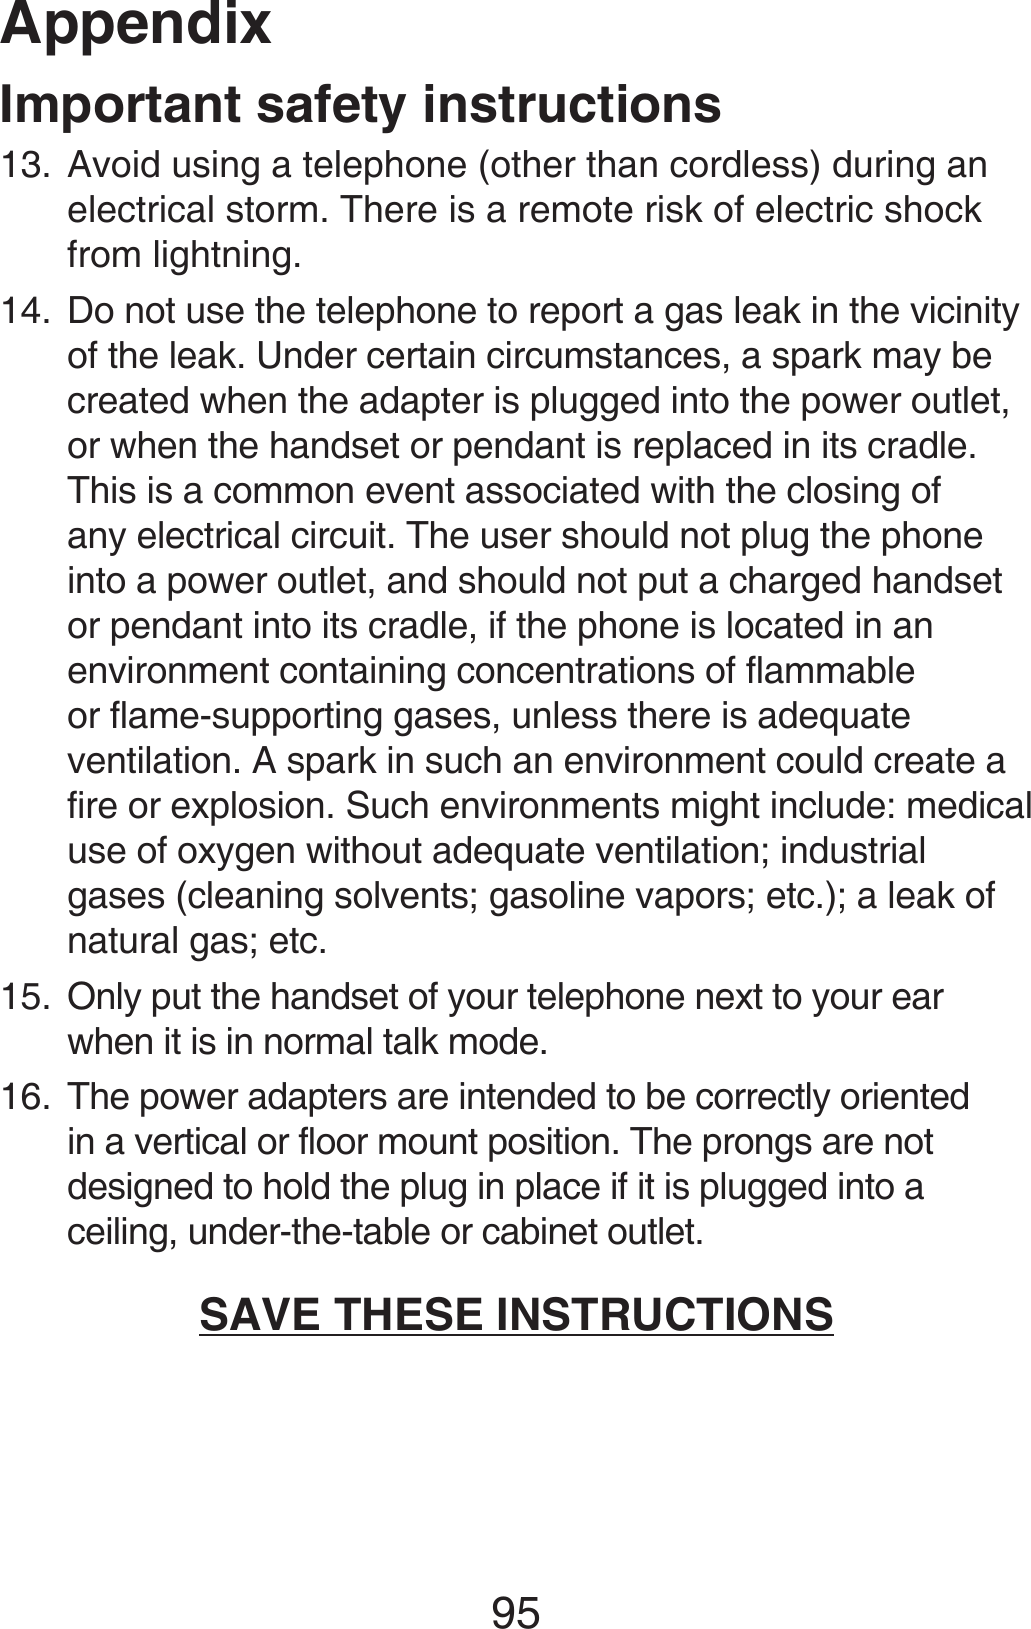 Appendix95Important safety instructionsAvoid using a telephone (other than cordless) during an electrical storm. There is a remote risk of electric shock from lightning.Do not use the telephone to report a gas leak in the vicinity of the leak. Under certain circumstances, a spark may be created when the adapter is plugged into the power outlet, or when the handset or pendant is replaced in its cradle. This is a common event associated with the closing of any electrical circuit. The user should not plug the phone into a power outlet, and should not put a charged handset or pendant into its cradle, if the phone is located in an environment containing concentrations of flammable or flame-supporting gases, unless there is adequate ventilation. A spark in such an environment could create a fire or explosion. Such environments might include: medical use of oxygen without adequate ventilation; industrial gases (cleaning solvents; gasoline vapors; etc.); a leak of natural gas; etc.Only put the handset of your telephone next to your ear when it is in normal talk mode.The power adapters are intended to be correctly oriented in a vertical or floor mount position. The prongs are not designed to hold the plug in place if it is plugged into a ceiling, under-the-table or cabinet outlet.SAVE THESE INSTRUCTIONS13.14.15.16.